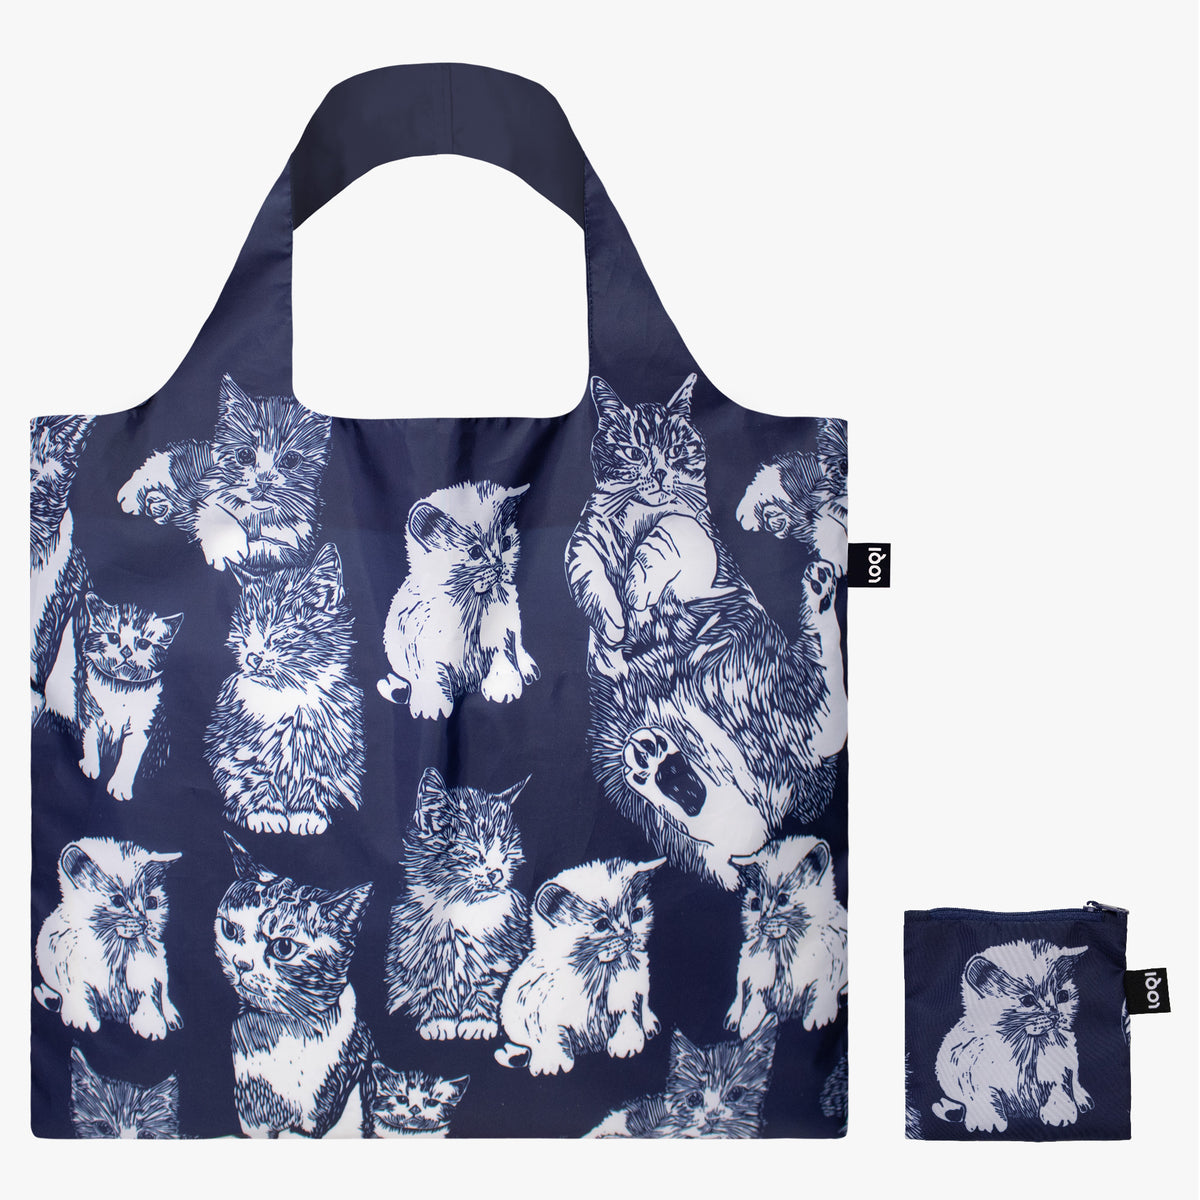 Cats Recycled Bag